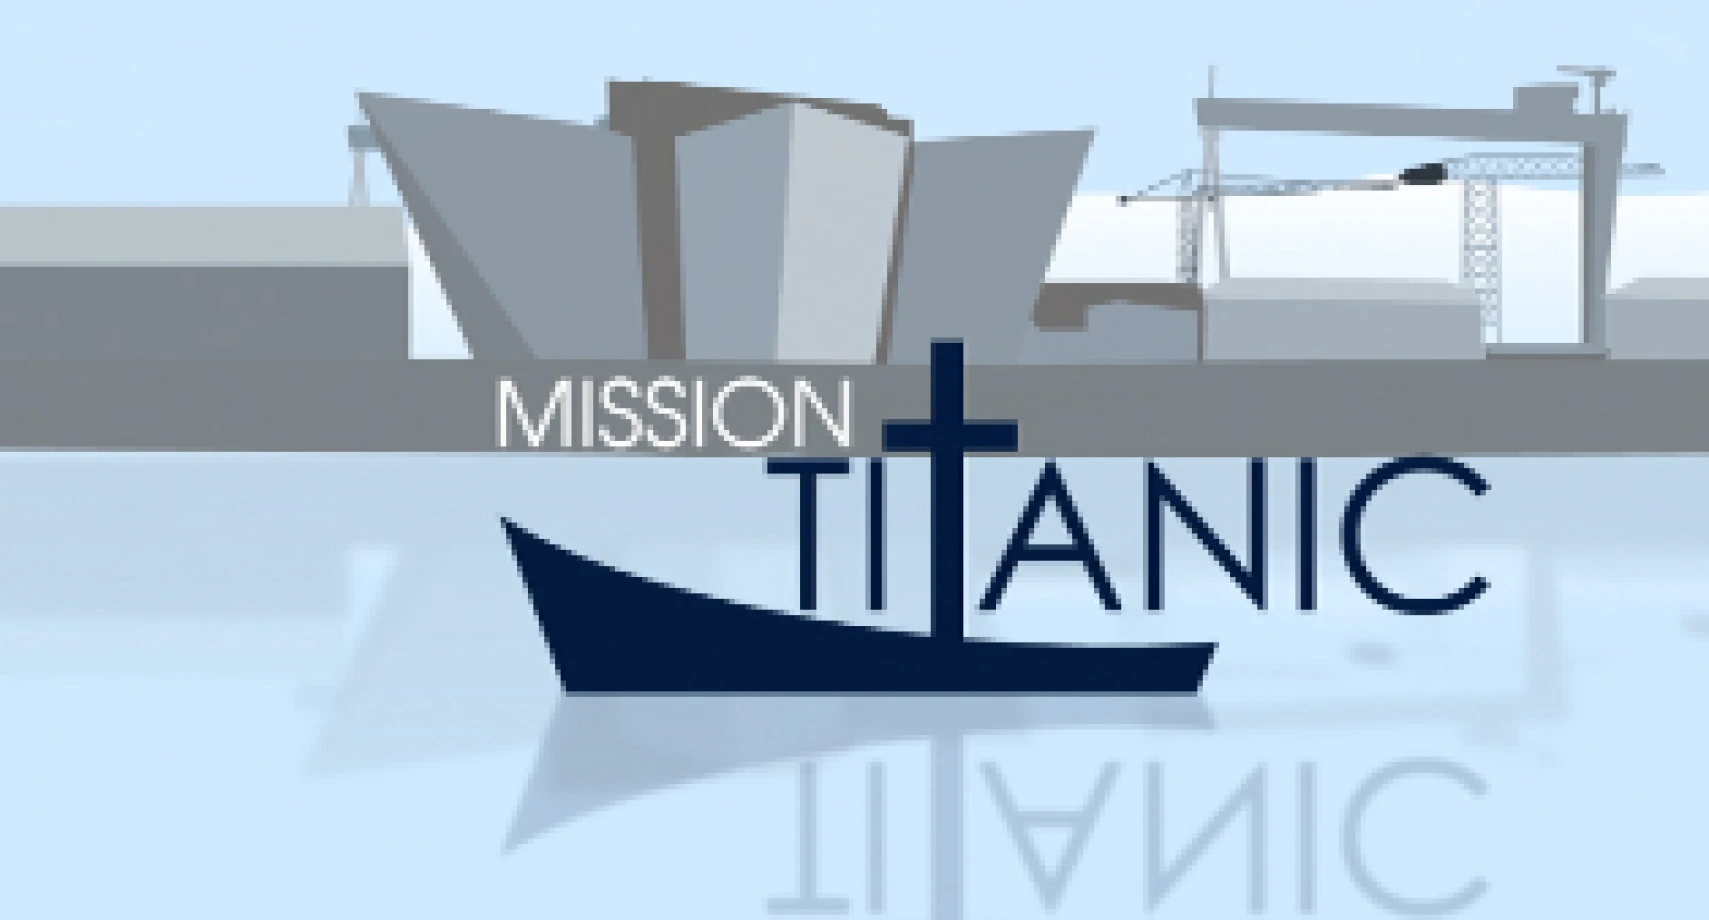 ’Mission Titanic’ will hit our screens on 30 September